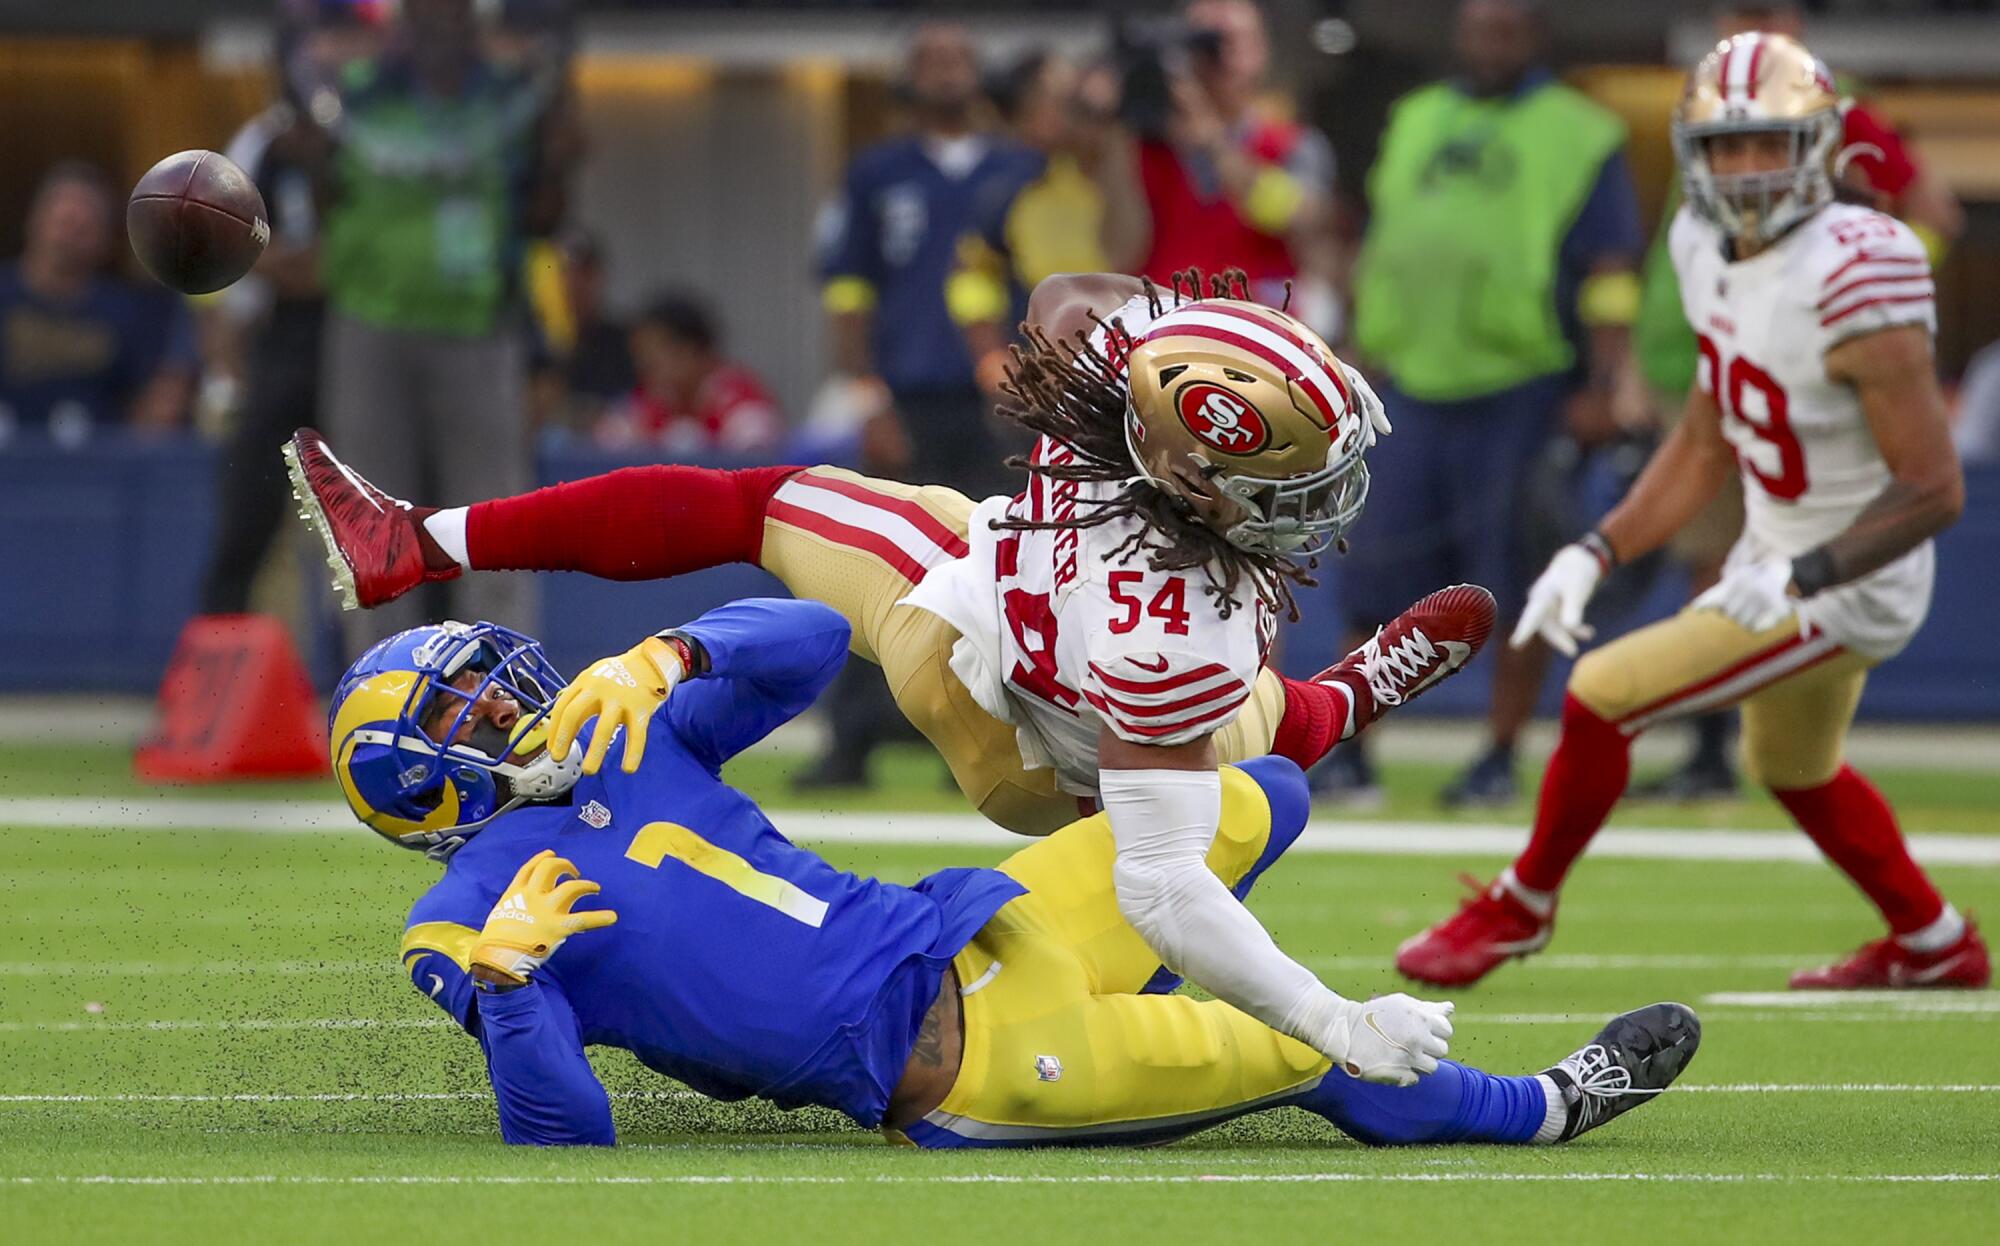 Rams wide receiver Allen Robinson watches a pass deflected by San Francisco 49ers linebacker Fred Warner.